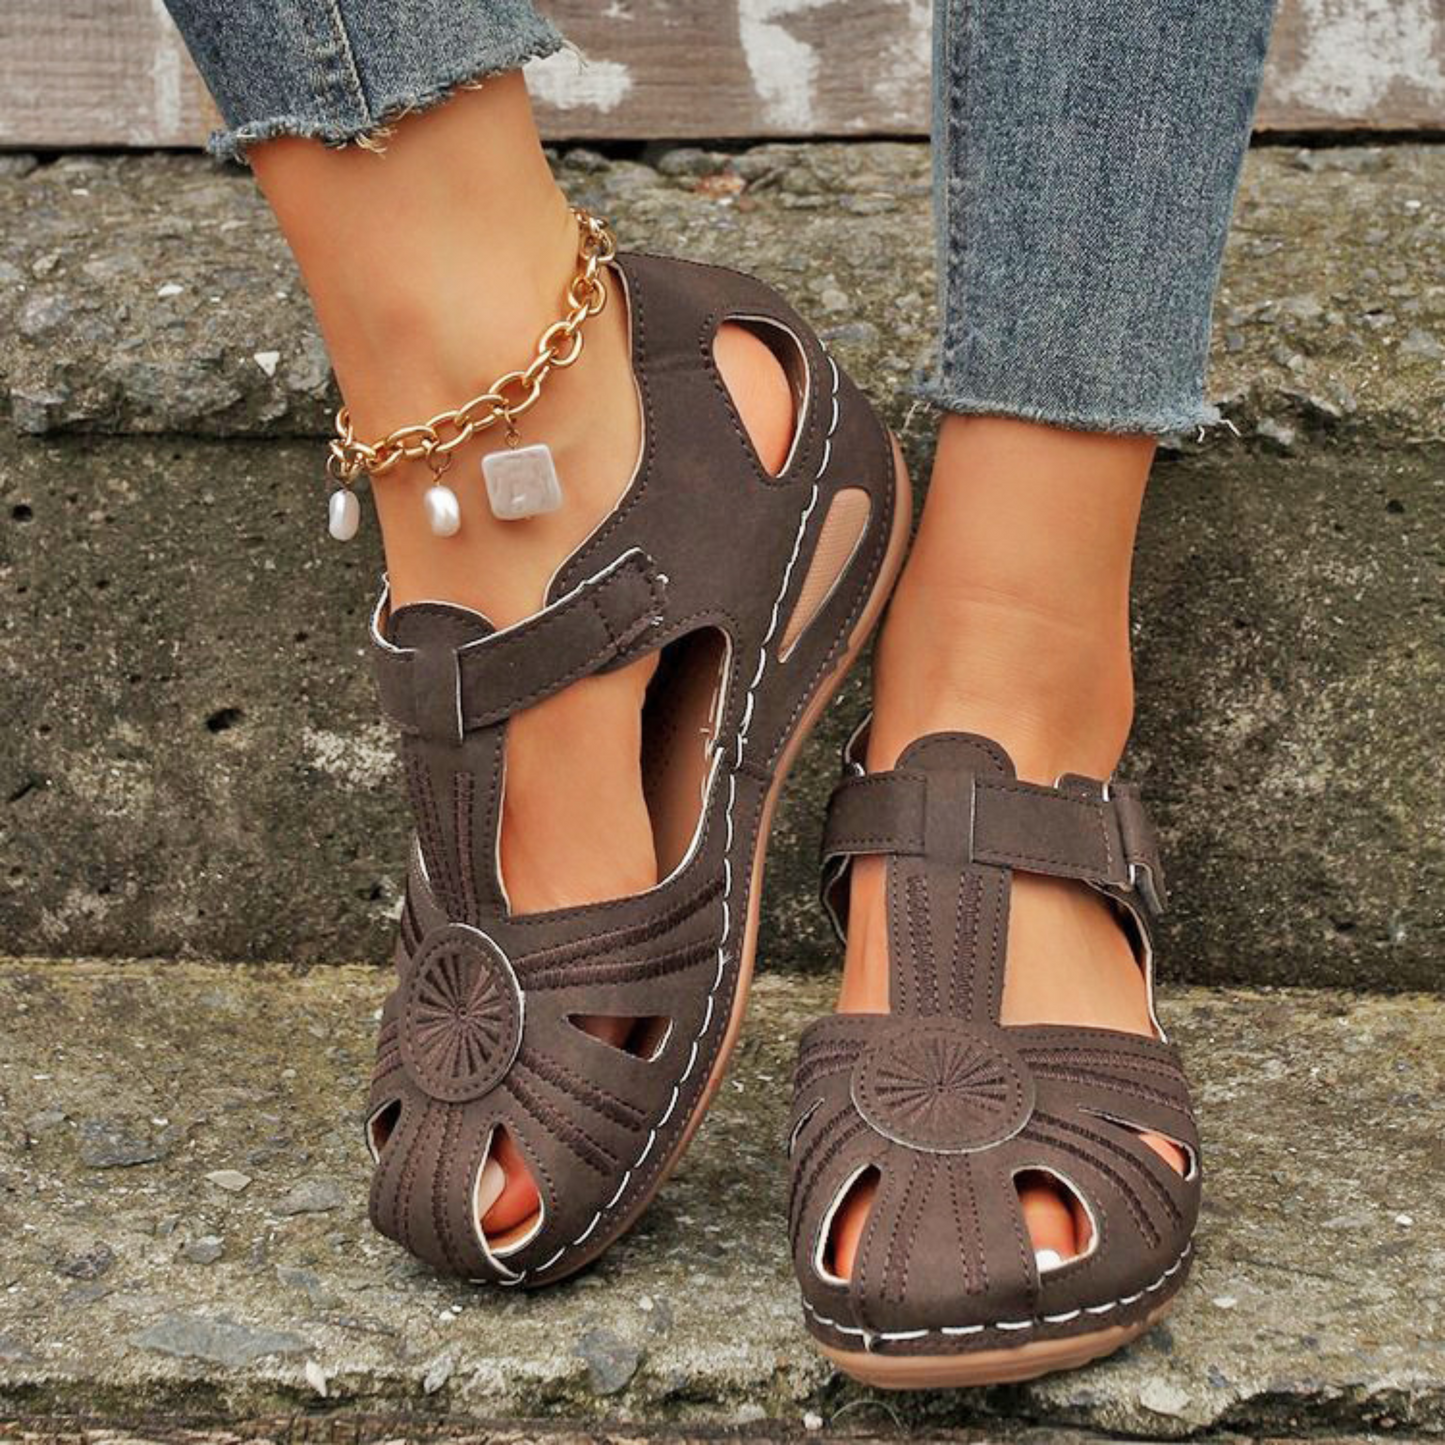 Airfleek Summer Floral Closed Toe Sandals For People With Bunions